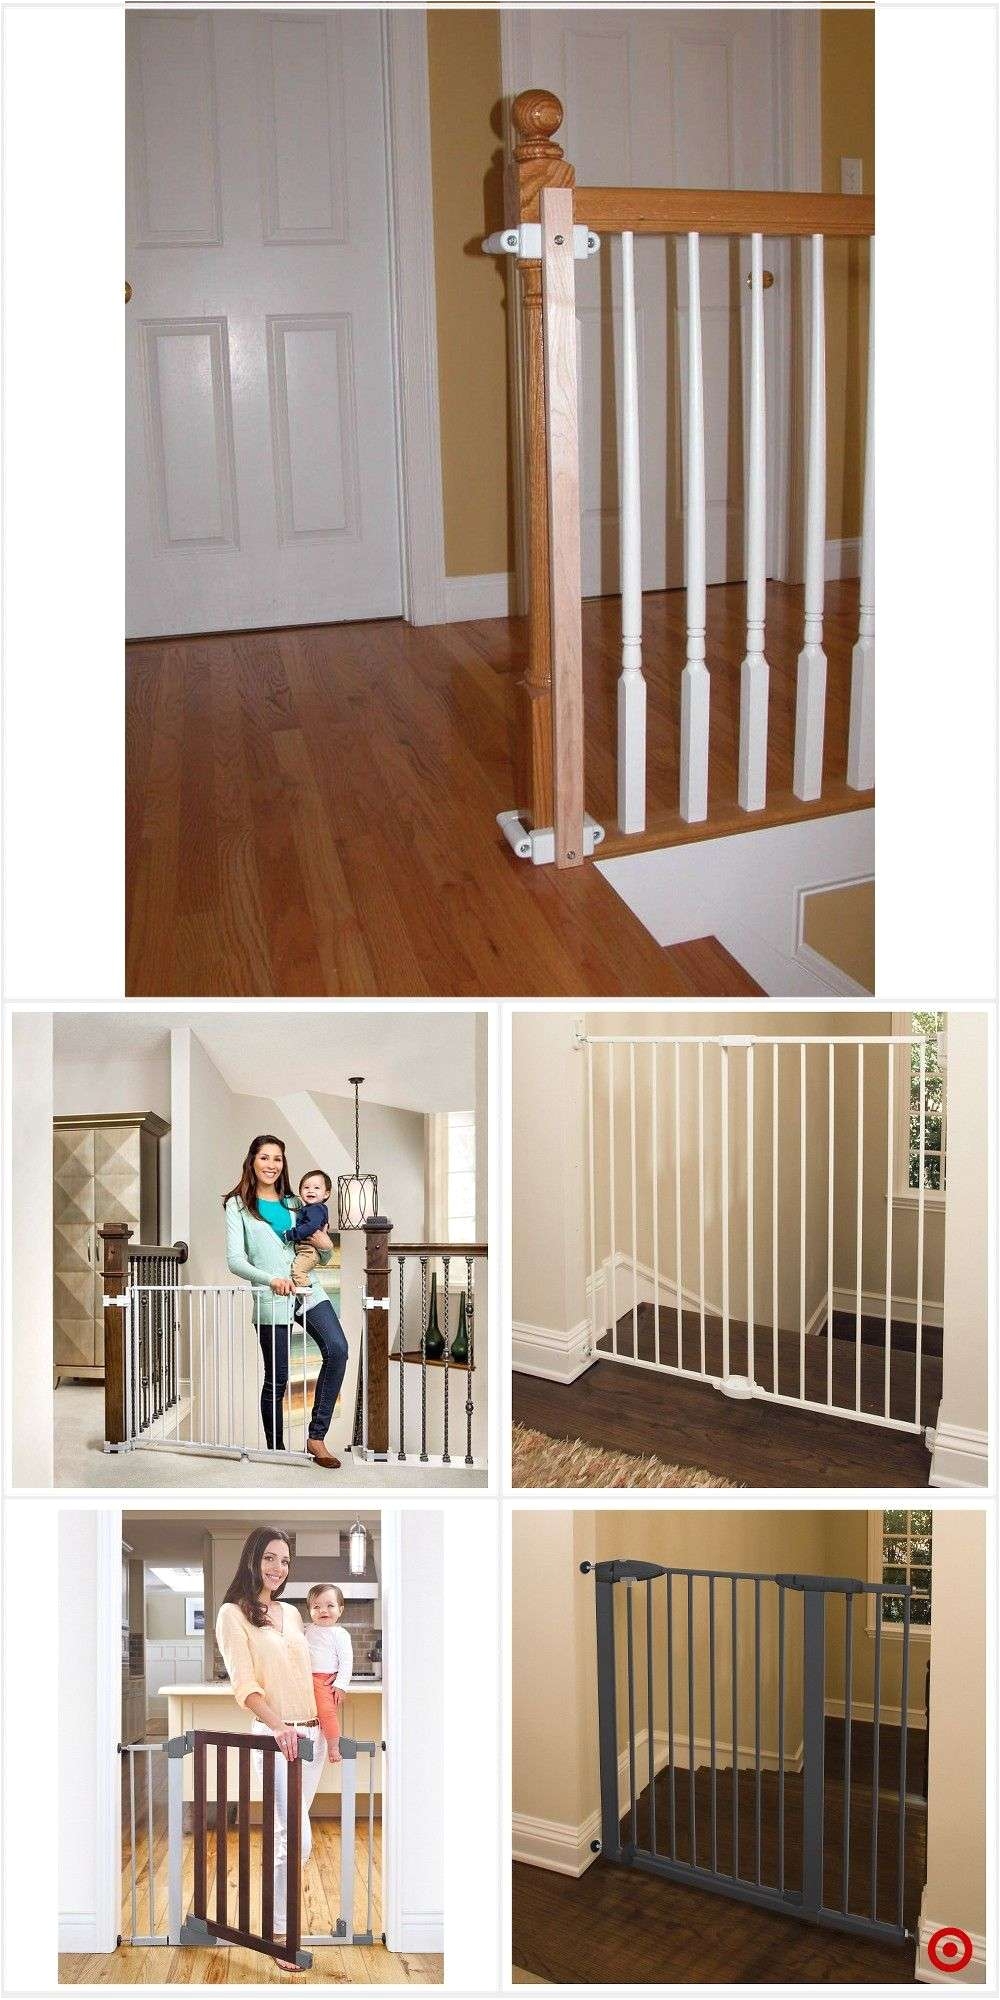 shop tar for gate installation kit you will love at great low inspiration of decorative baby